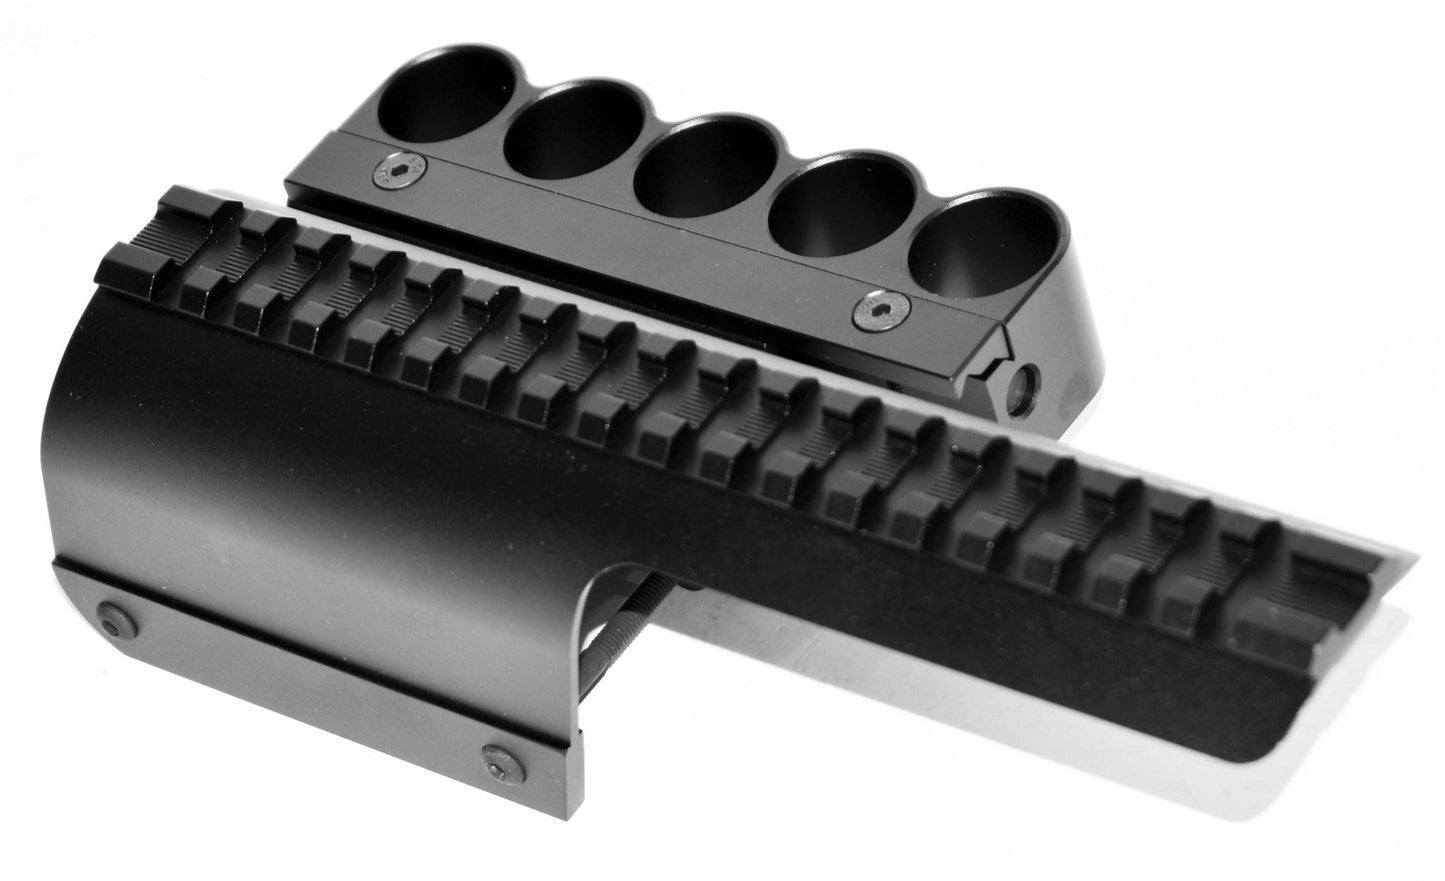 Trinity Base Mount Adapter Picatinny With Shell Holder Compatible With Benelli Nova And Benelli Super Nova Models 12 Gauge. - TRINITY SUPPLY INC